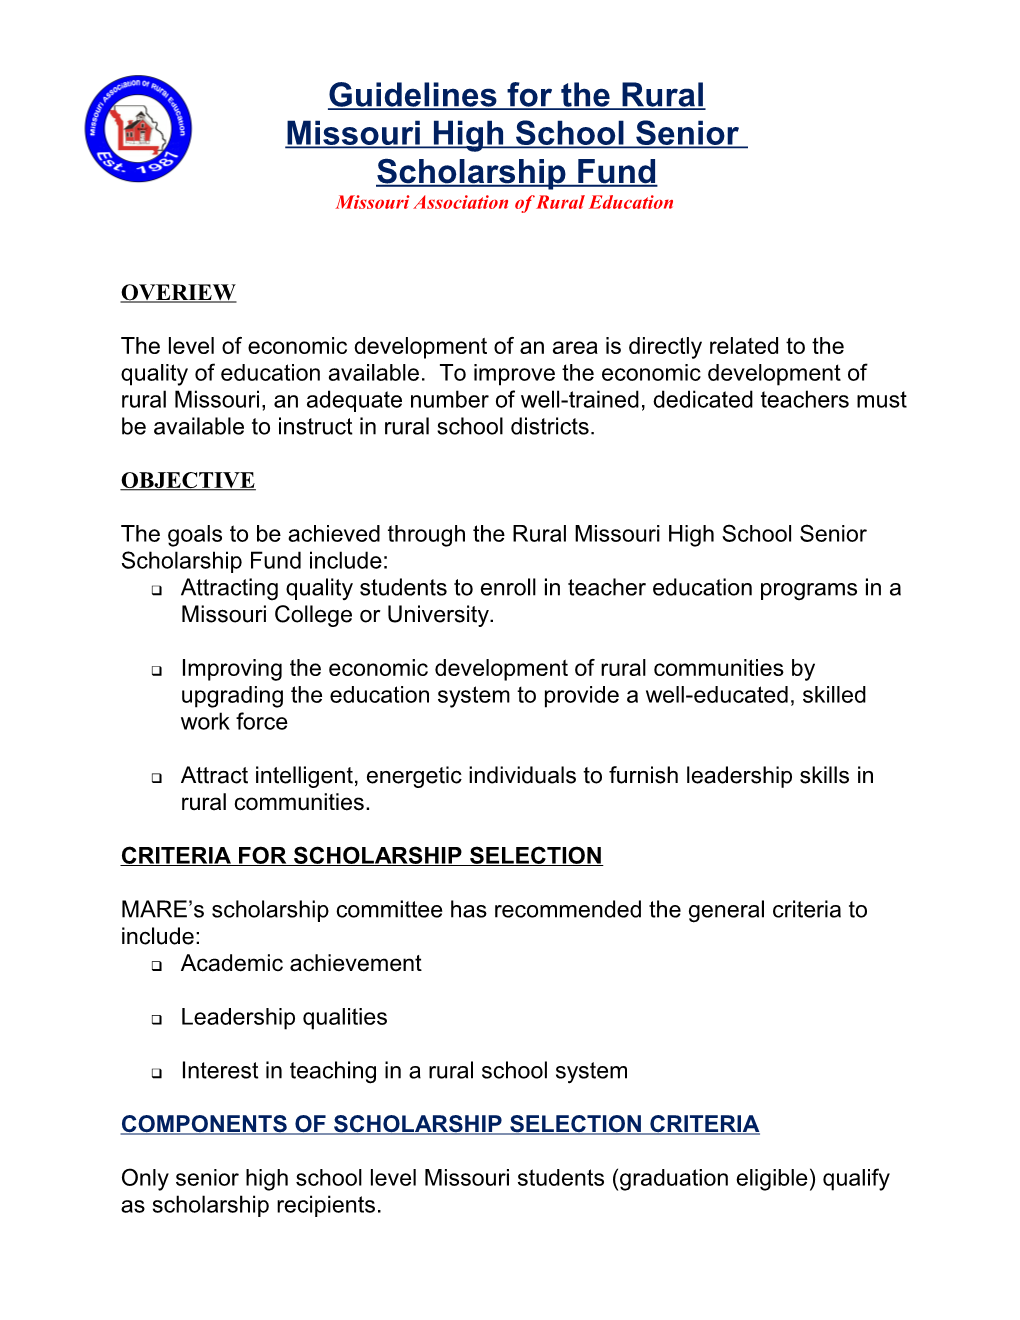 Guidelines for the Rural Missouri Scholarship Fund